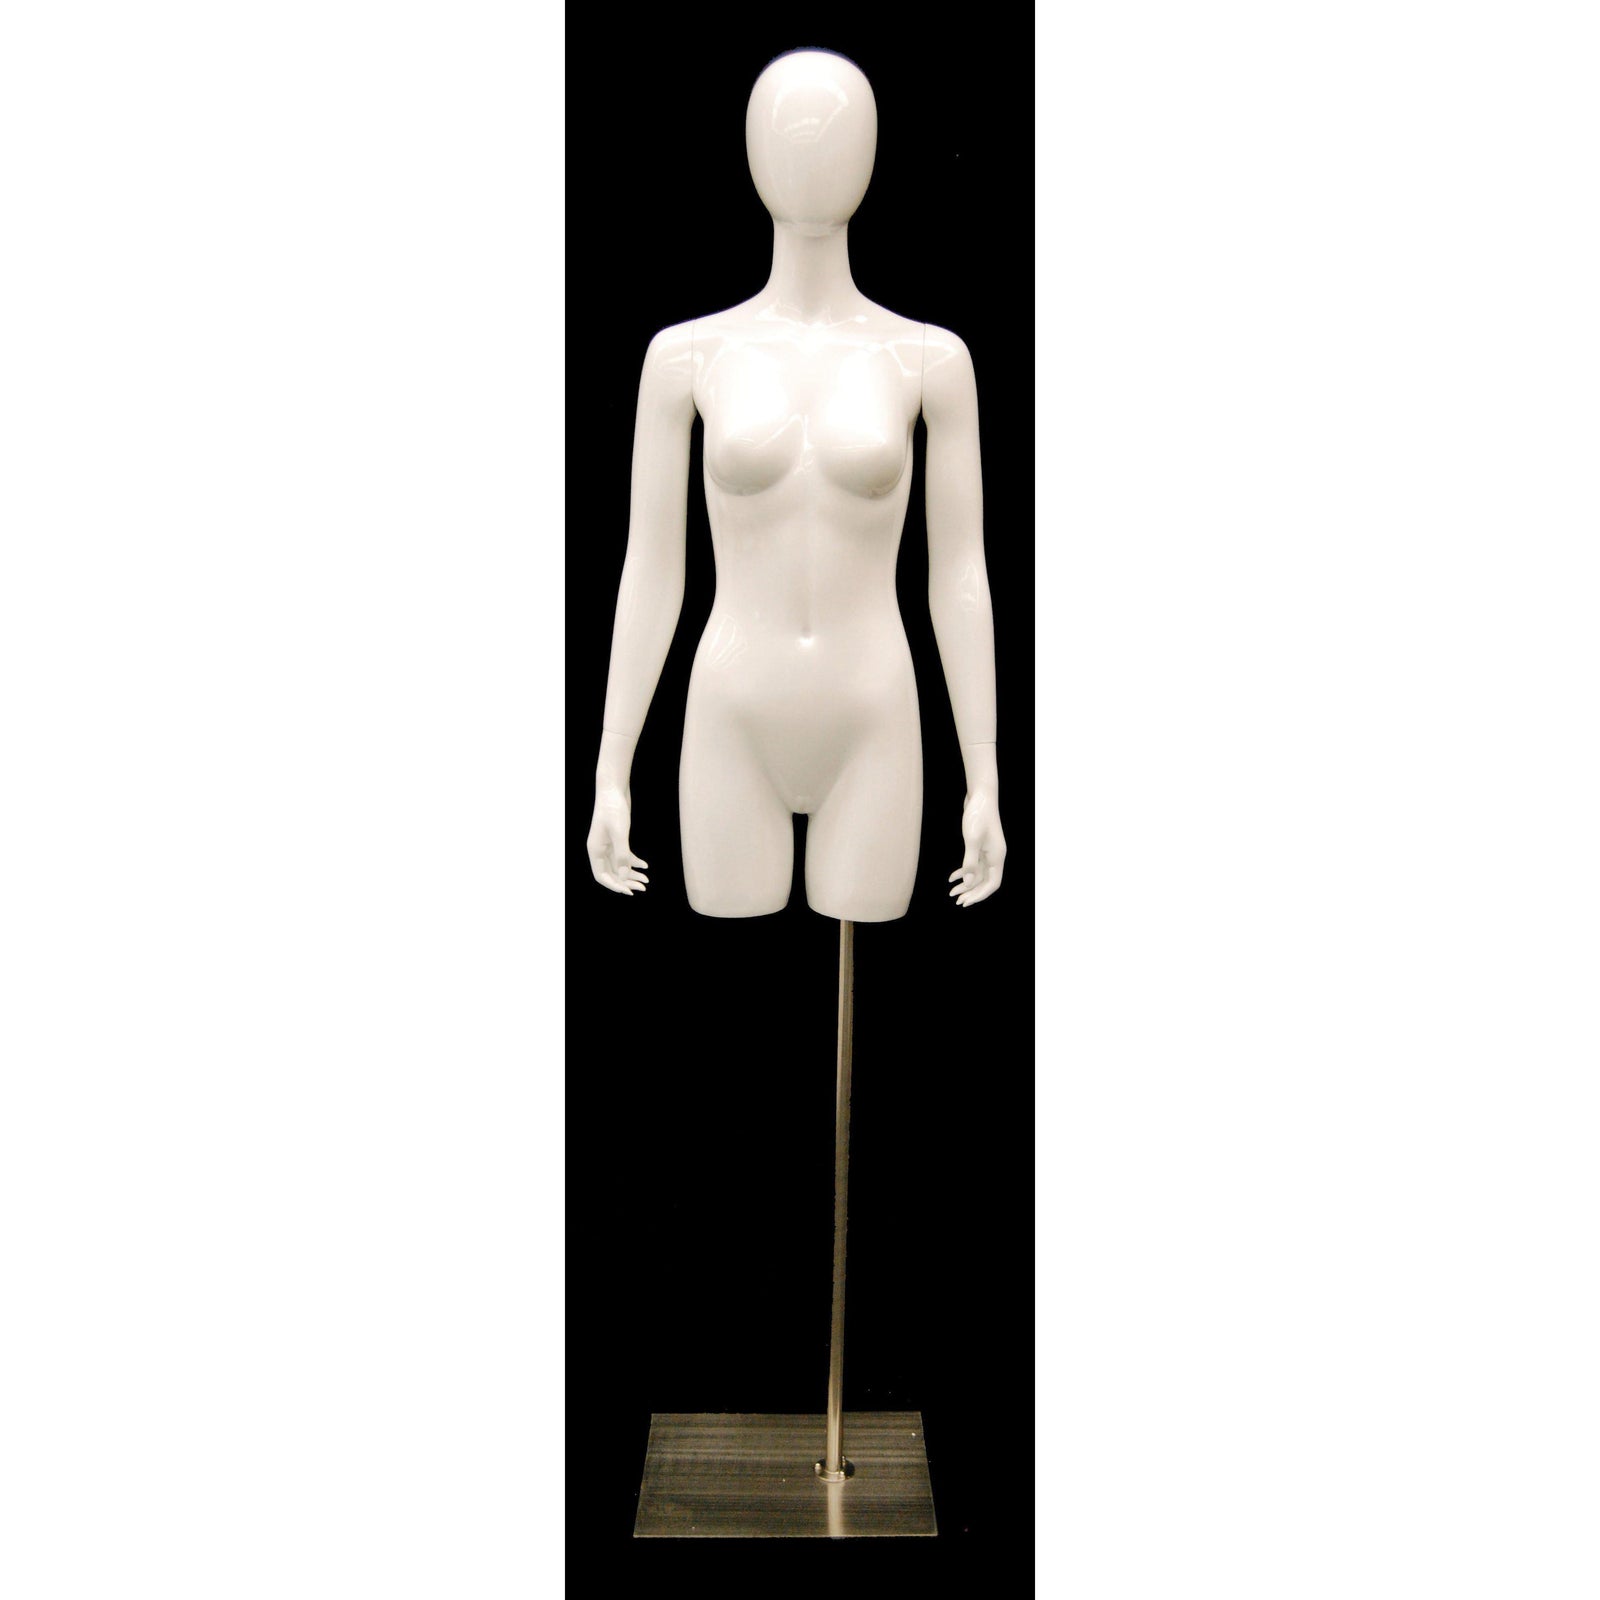 Full Round Egghead Male Half Body Mannequin - Store Clothing Display -  Glossy White W/ Round Chrome Stand